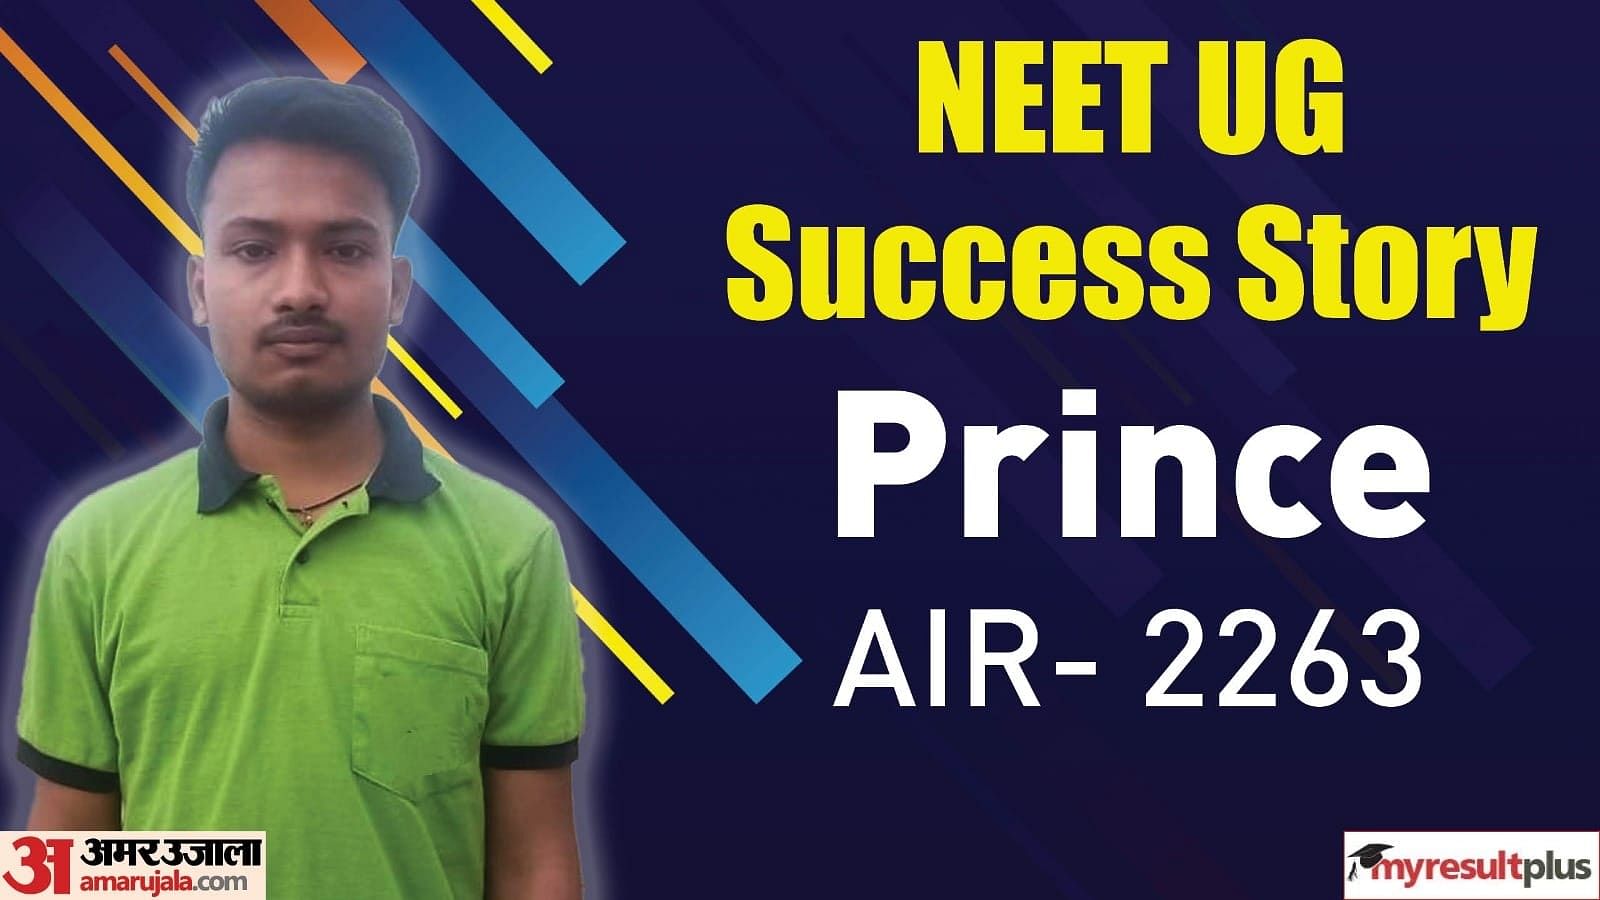 NEET Success Story: From Poverty to Fulfilling the Dream of Becoming a Doctor, Price Cracks NEET UG